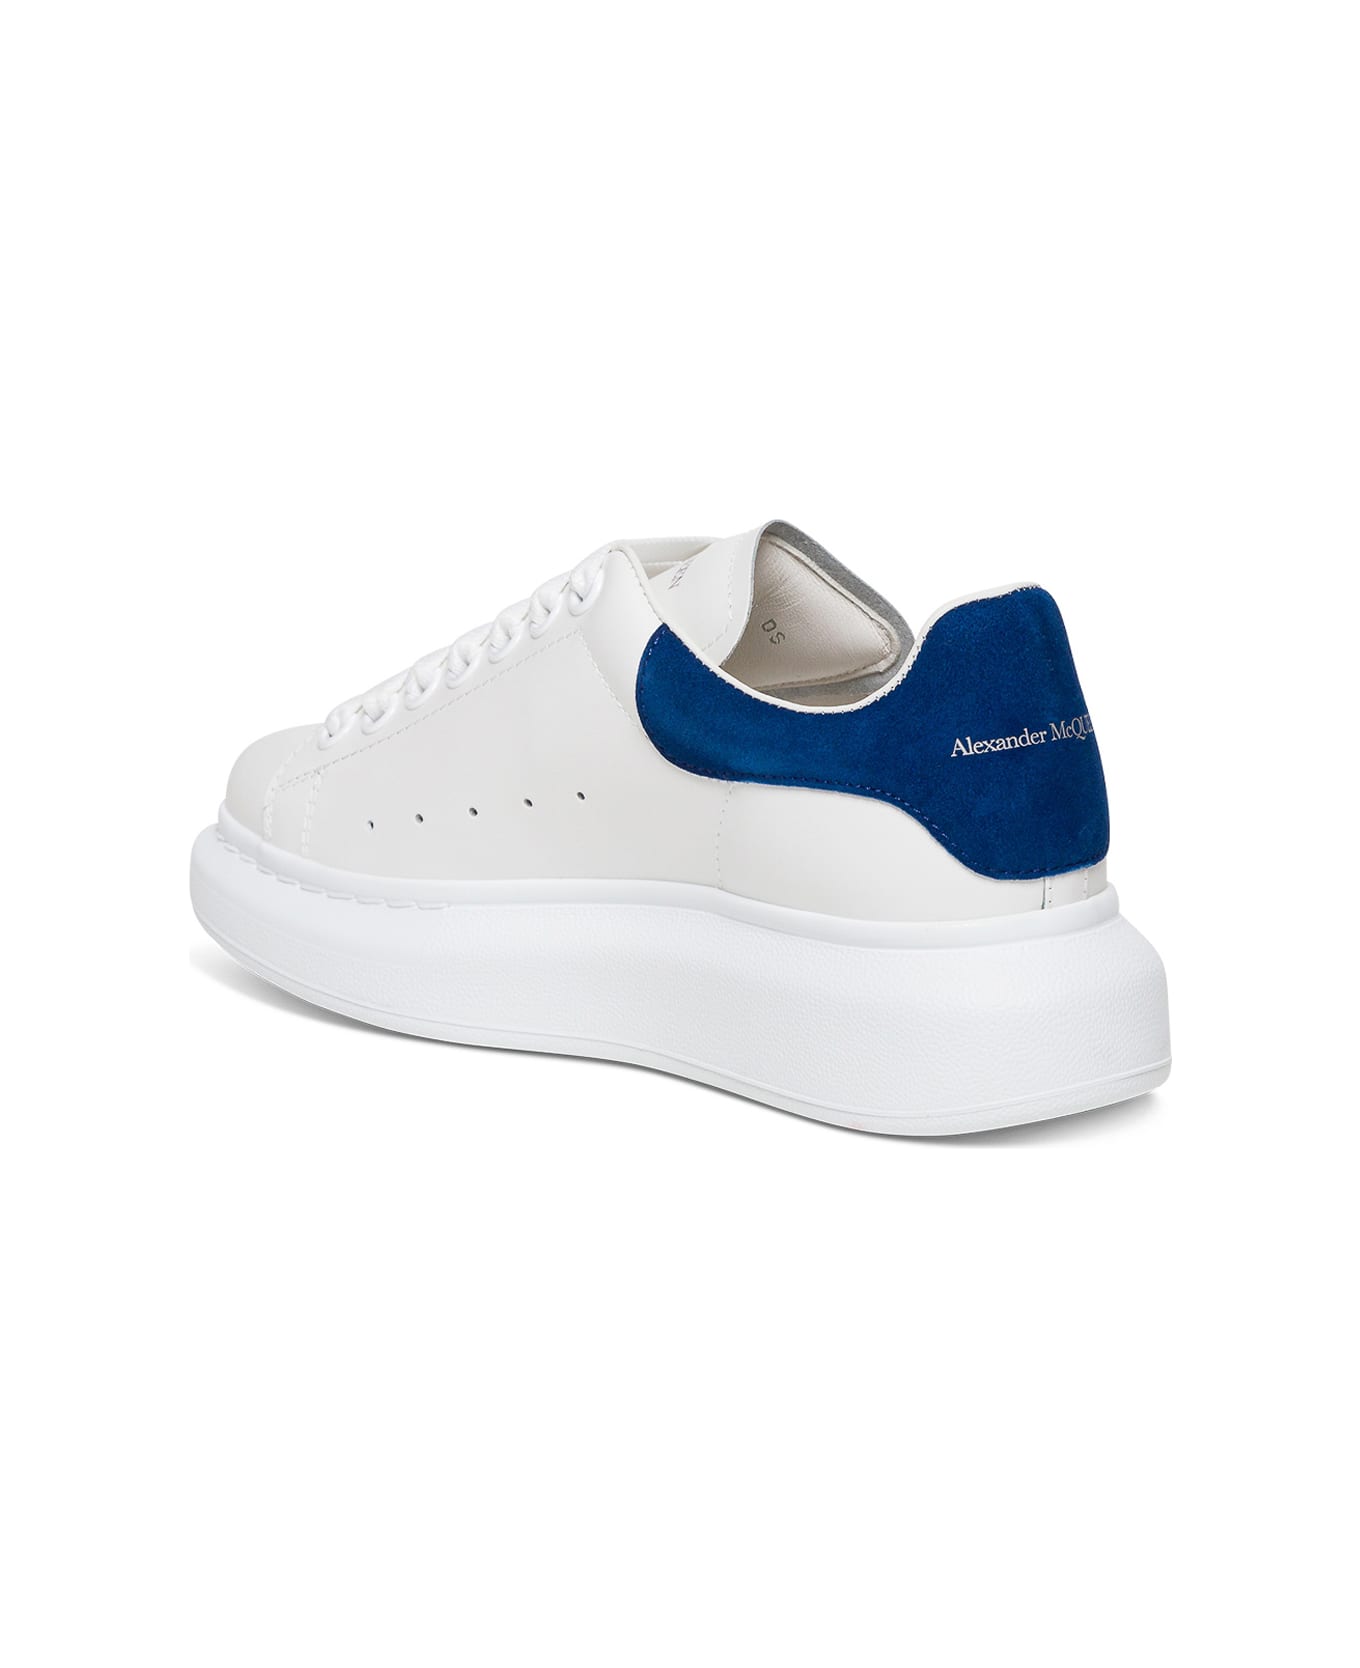 Alexander McQueen Larry White And Blue Leather Sneakers Alexander Mcqueen Woman - White